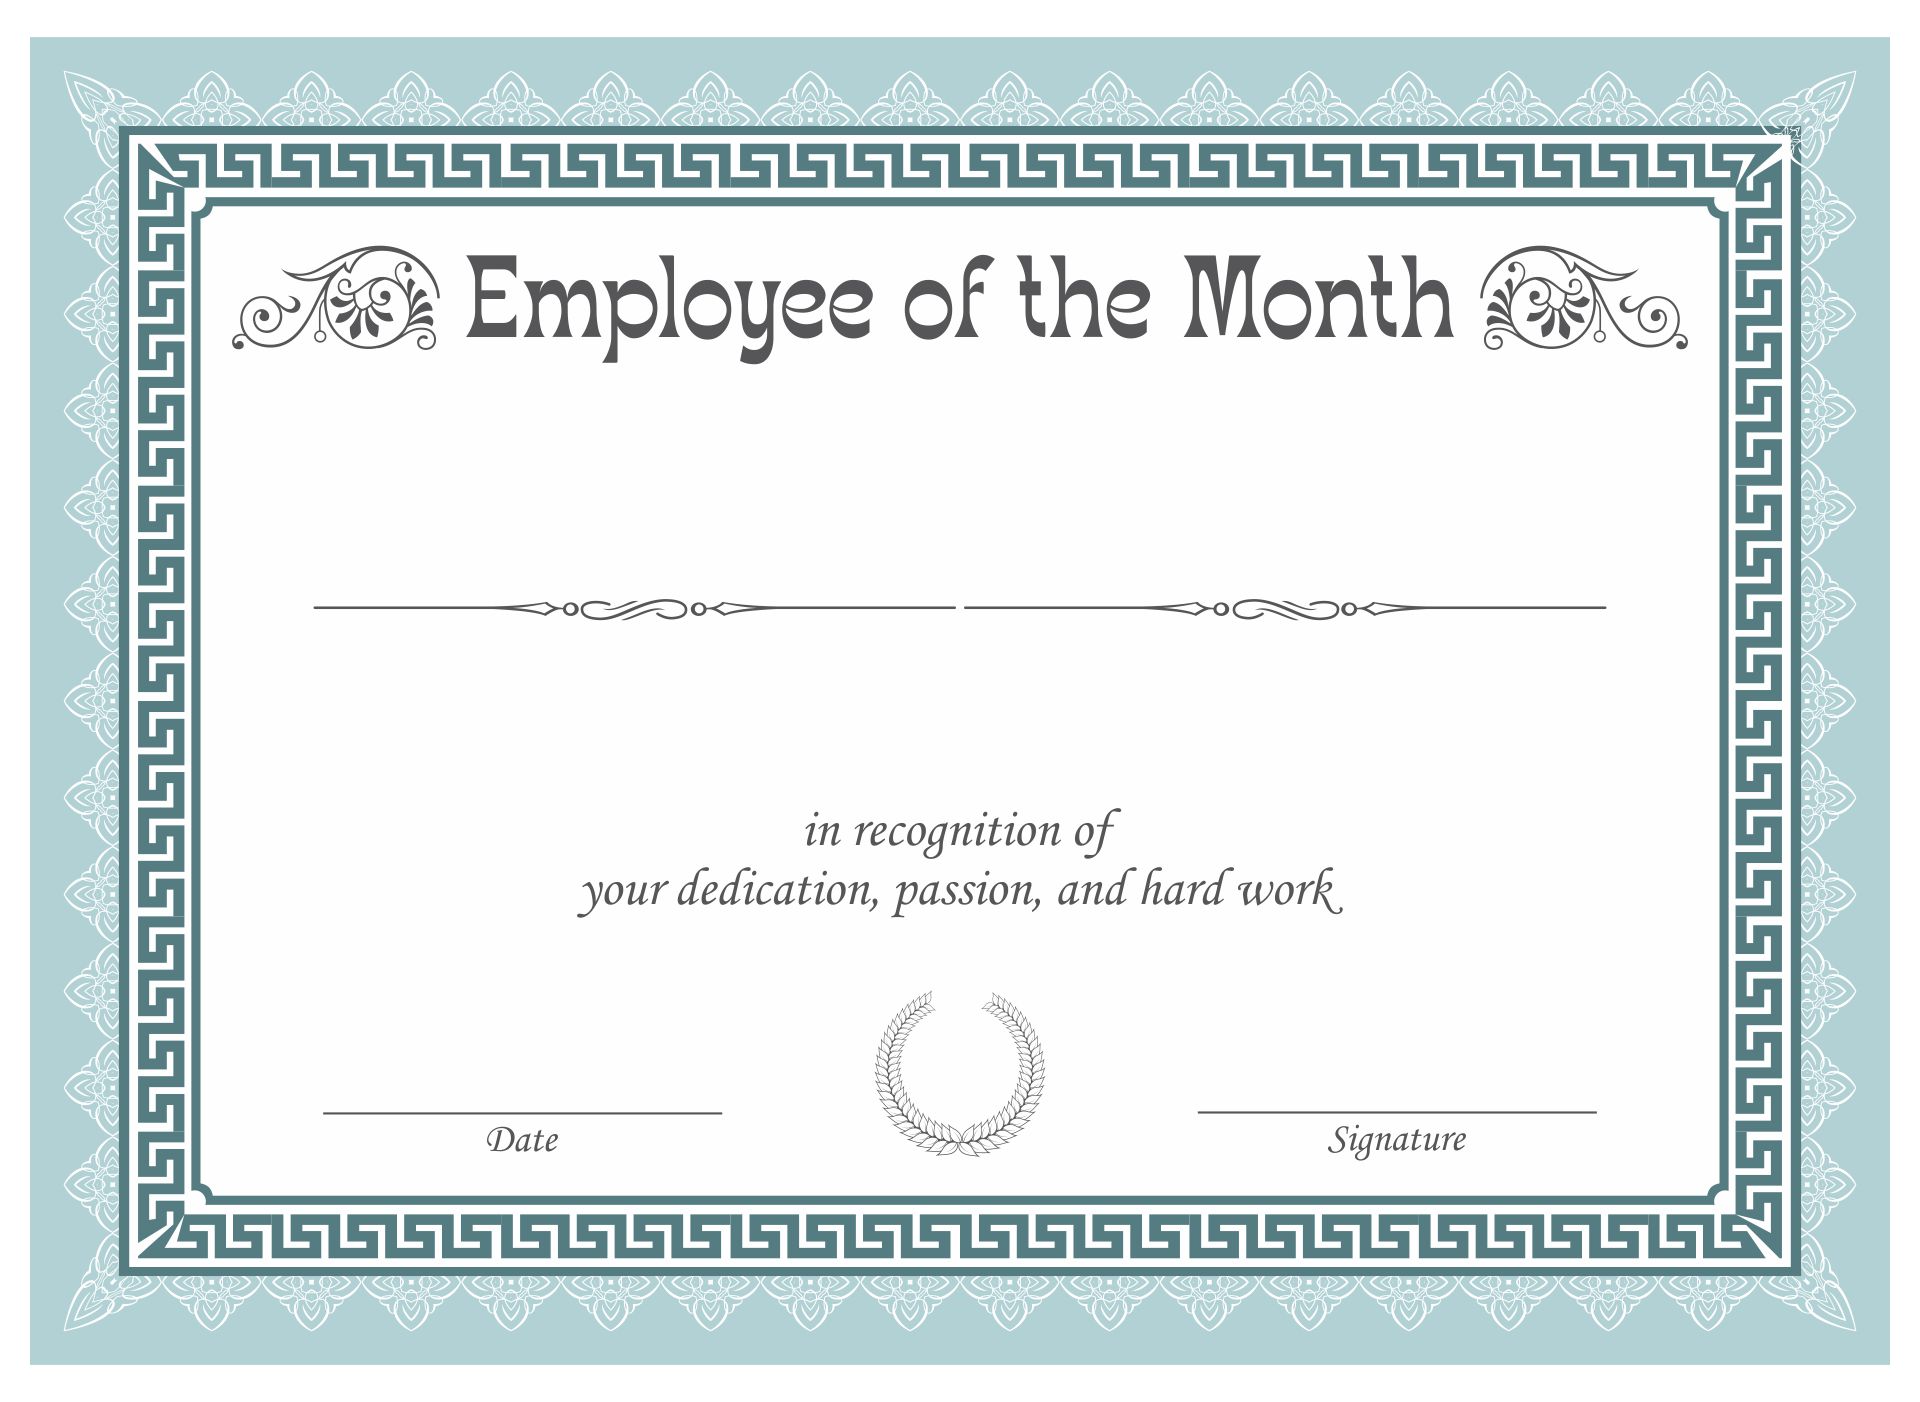 Printable Employee of the Month